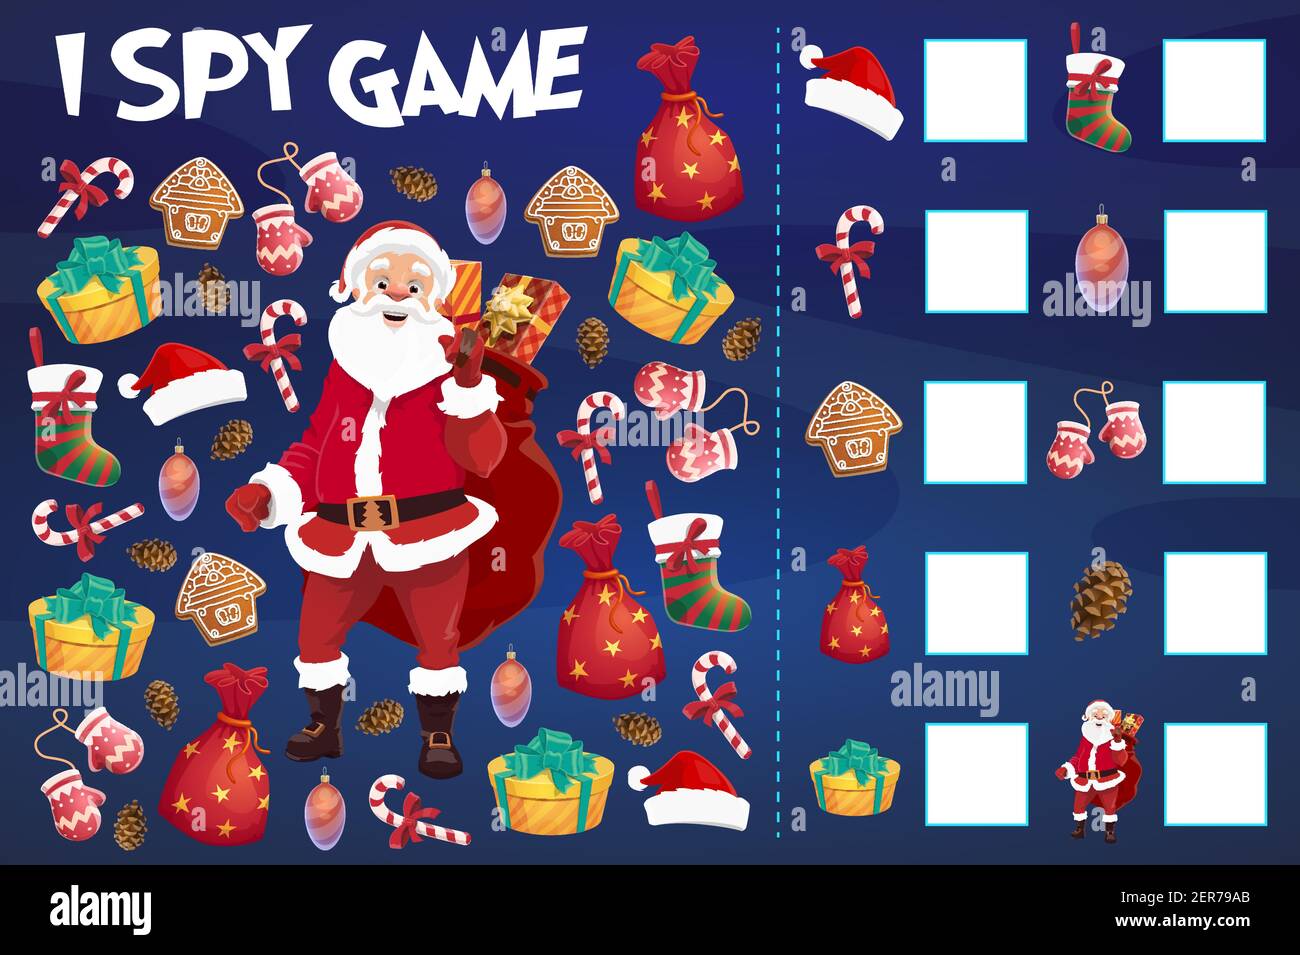 Premium Vector  I spy game, education puzzle with christmas gifts